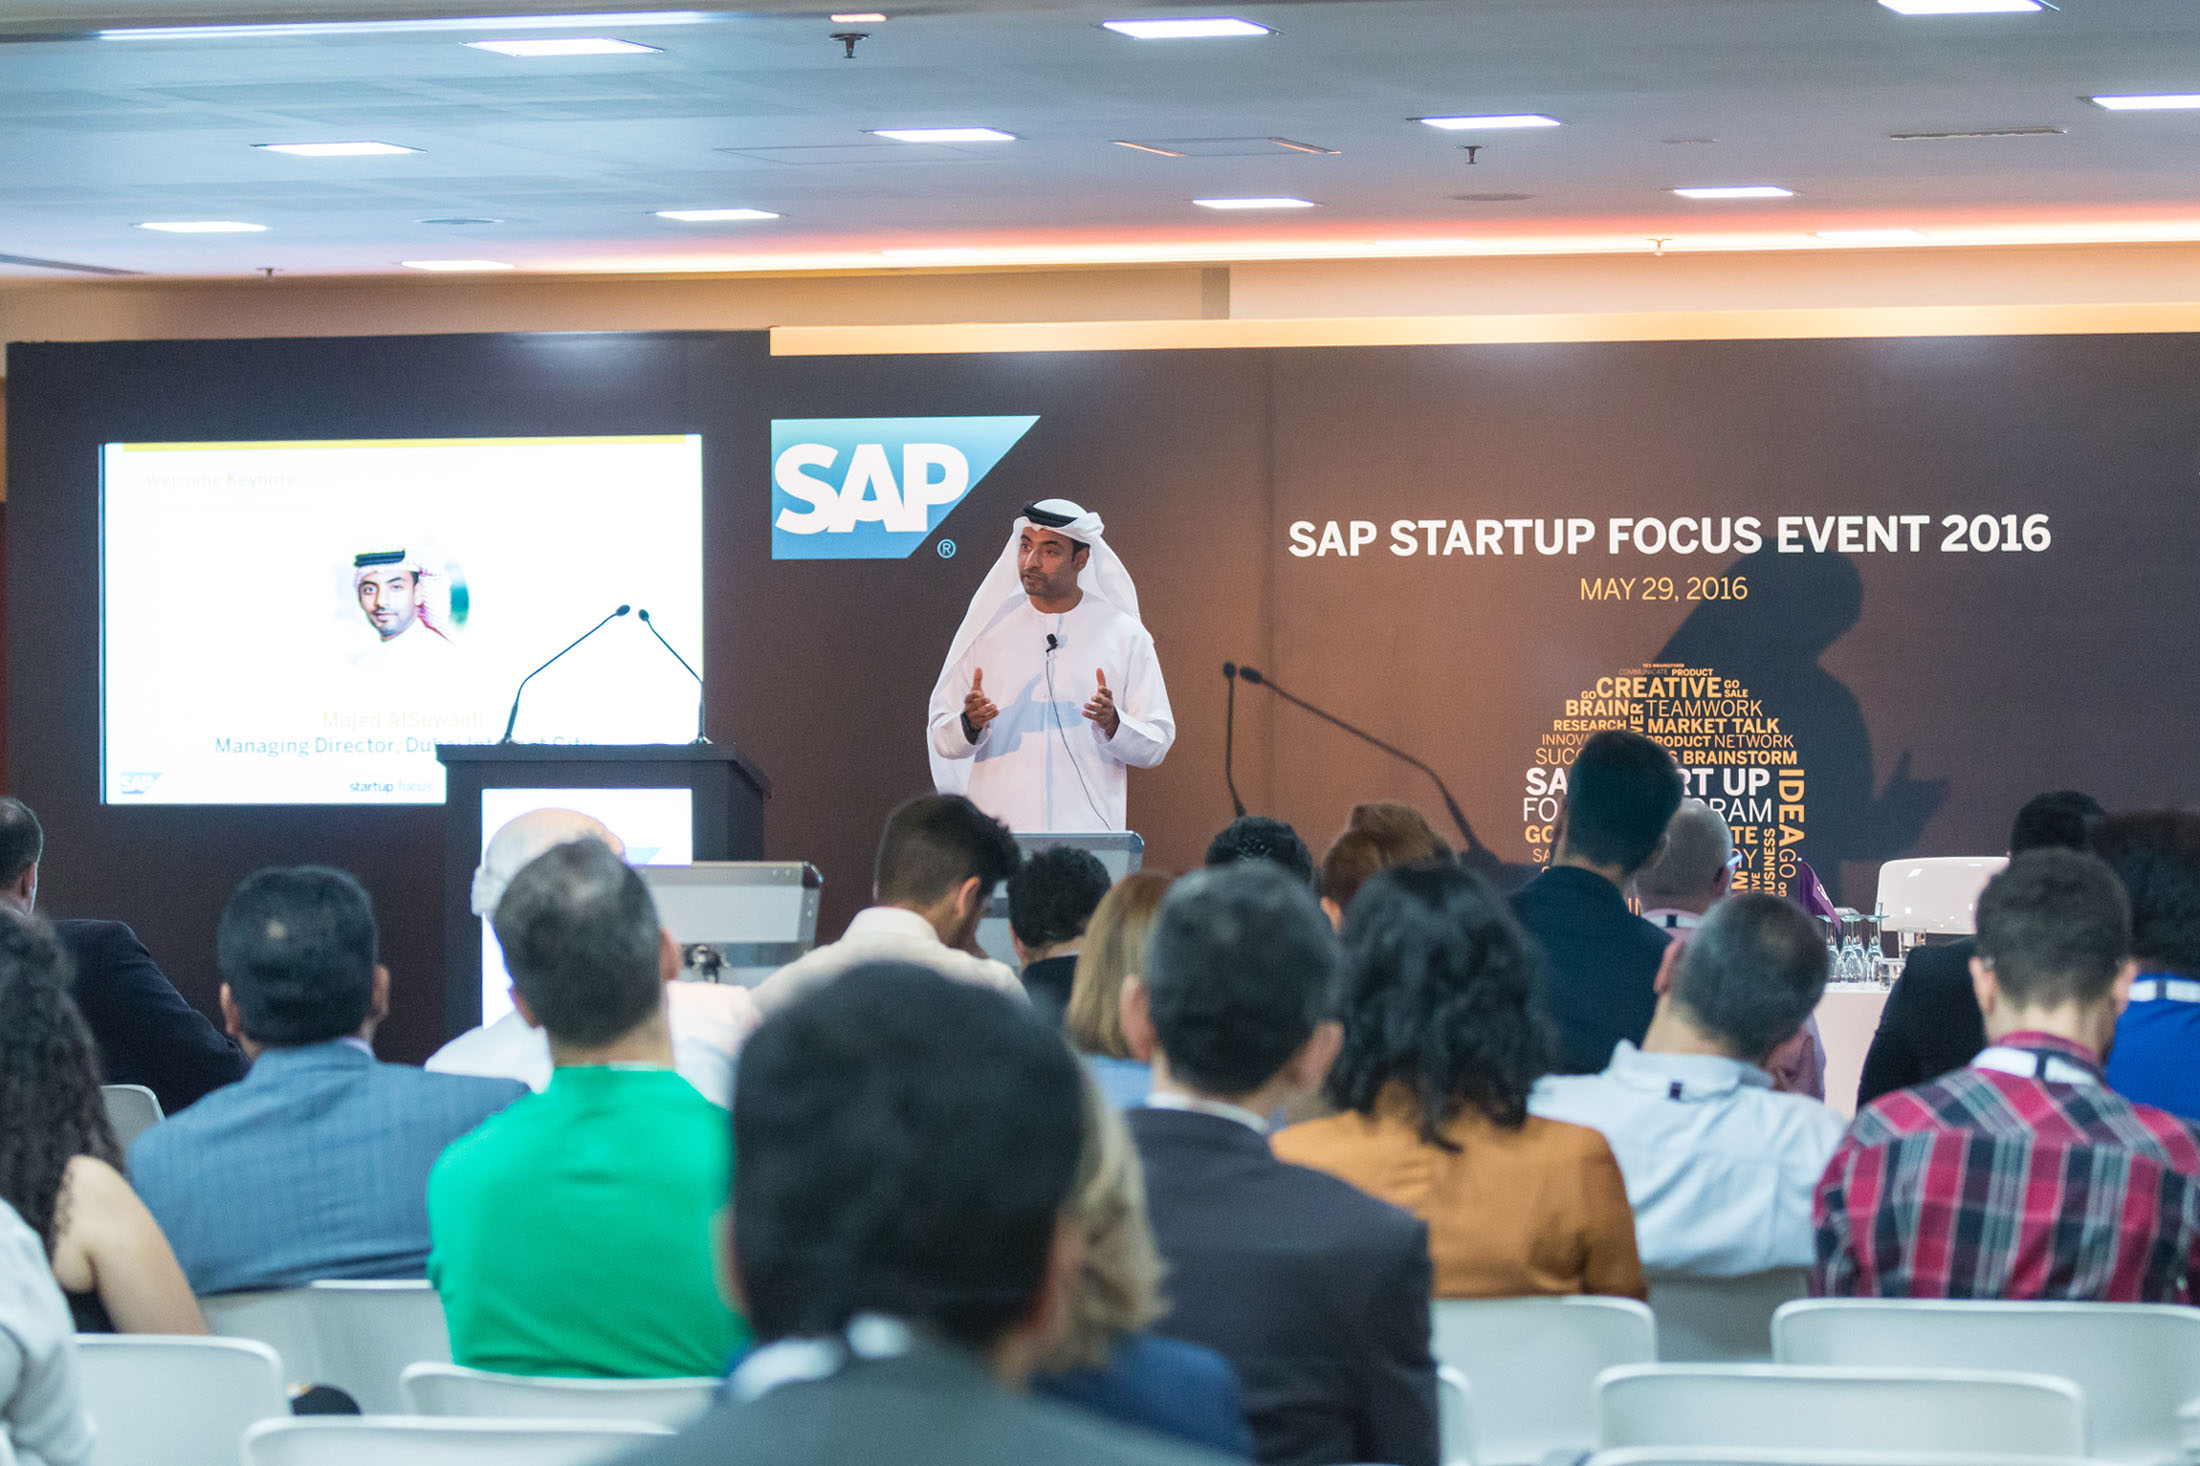 SAP and in5 Innovation Centre launch startup focus event 2016